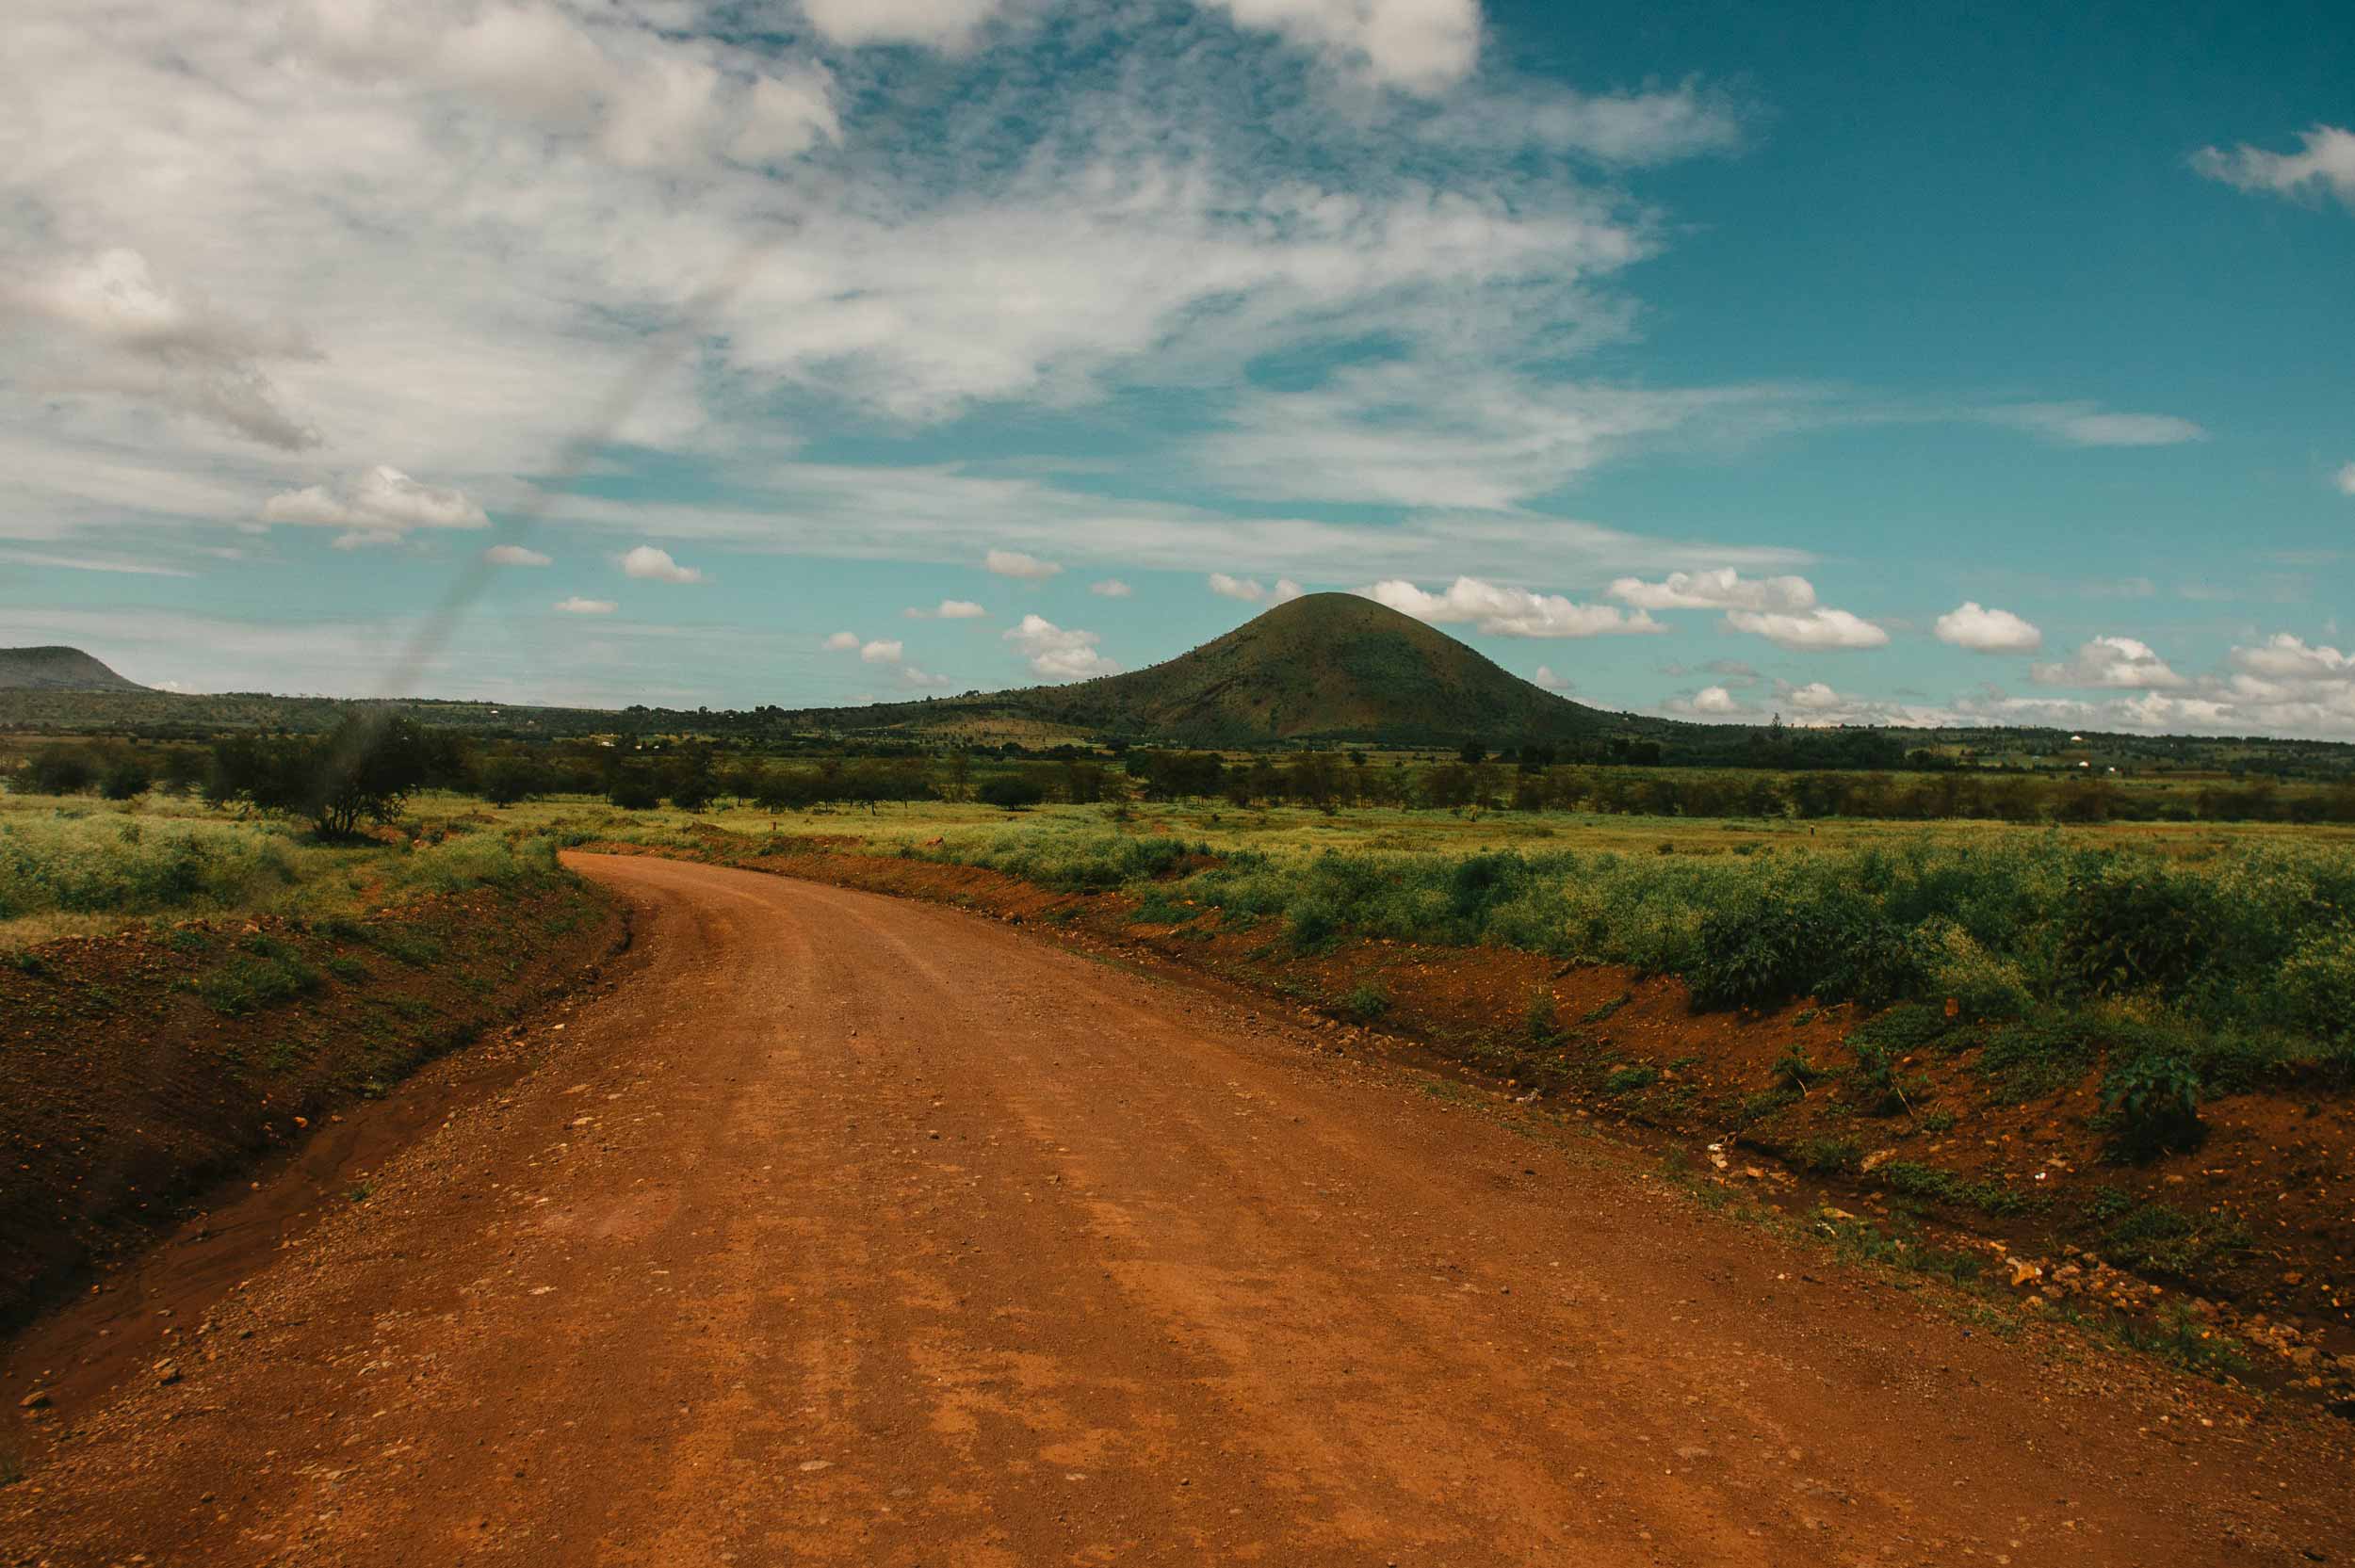 Landscape And A Dirtroad In Tanzania With A Hill In The Background